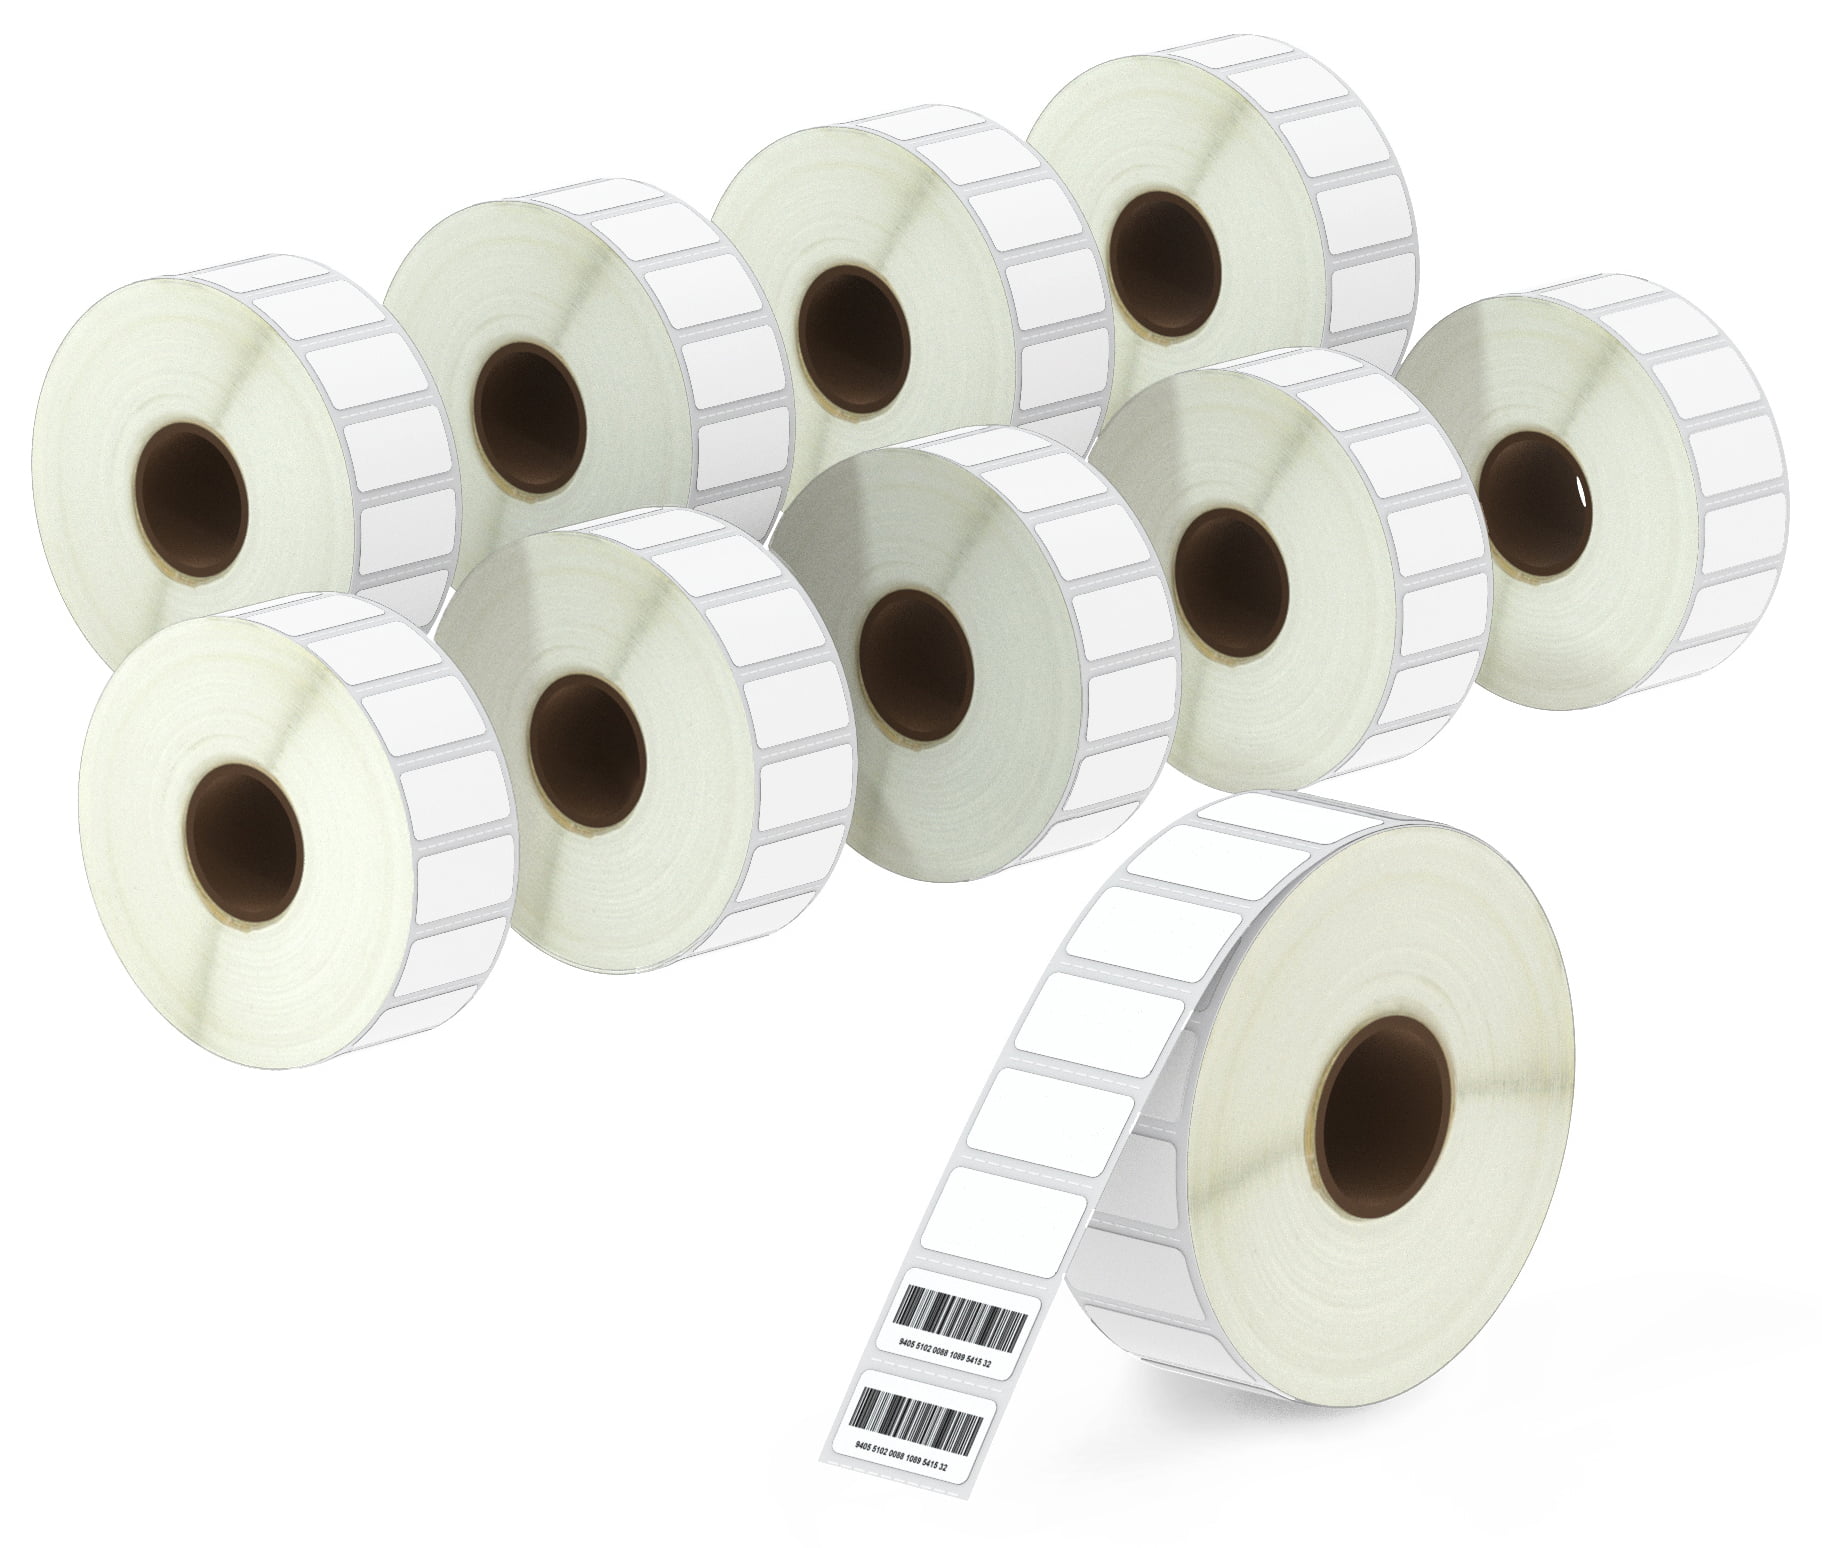 ,Premium Adhesive & Perforated 10 Rolls, 2500 Labels not for dymo 4XL BETCKEY 4 x 6 Blank Shipping Labels Compatible with Zebra & Rollo Label Printer 